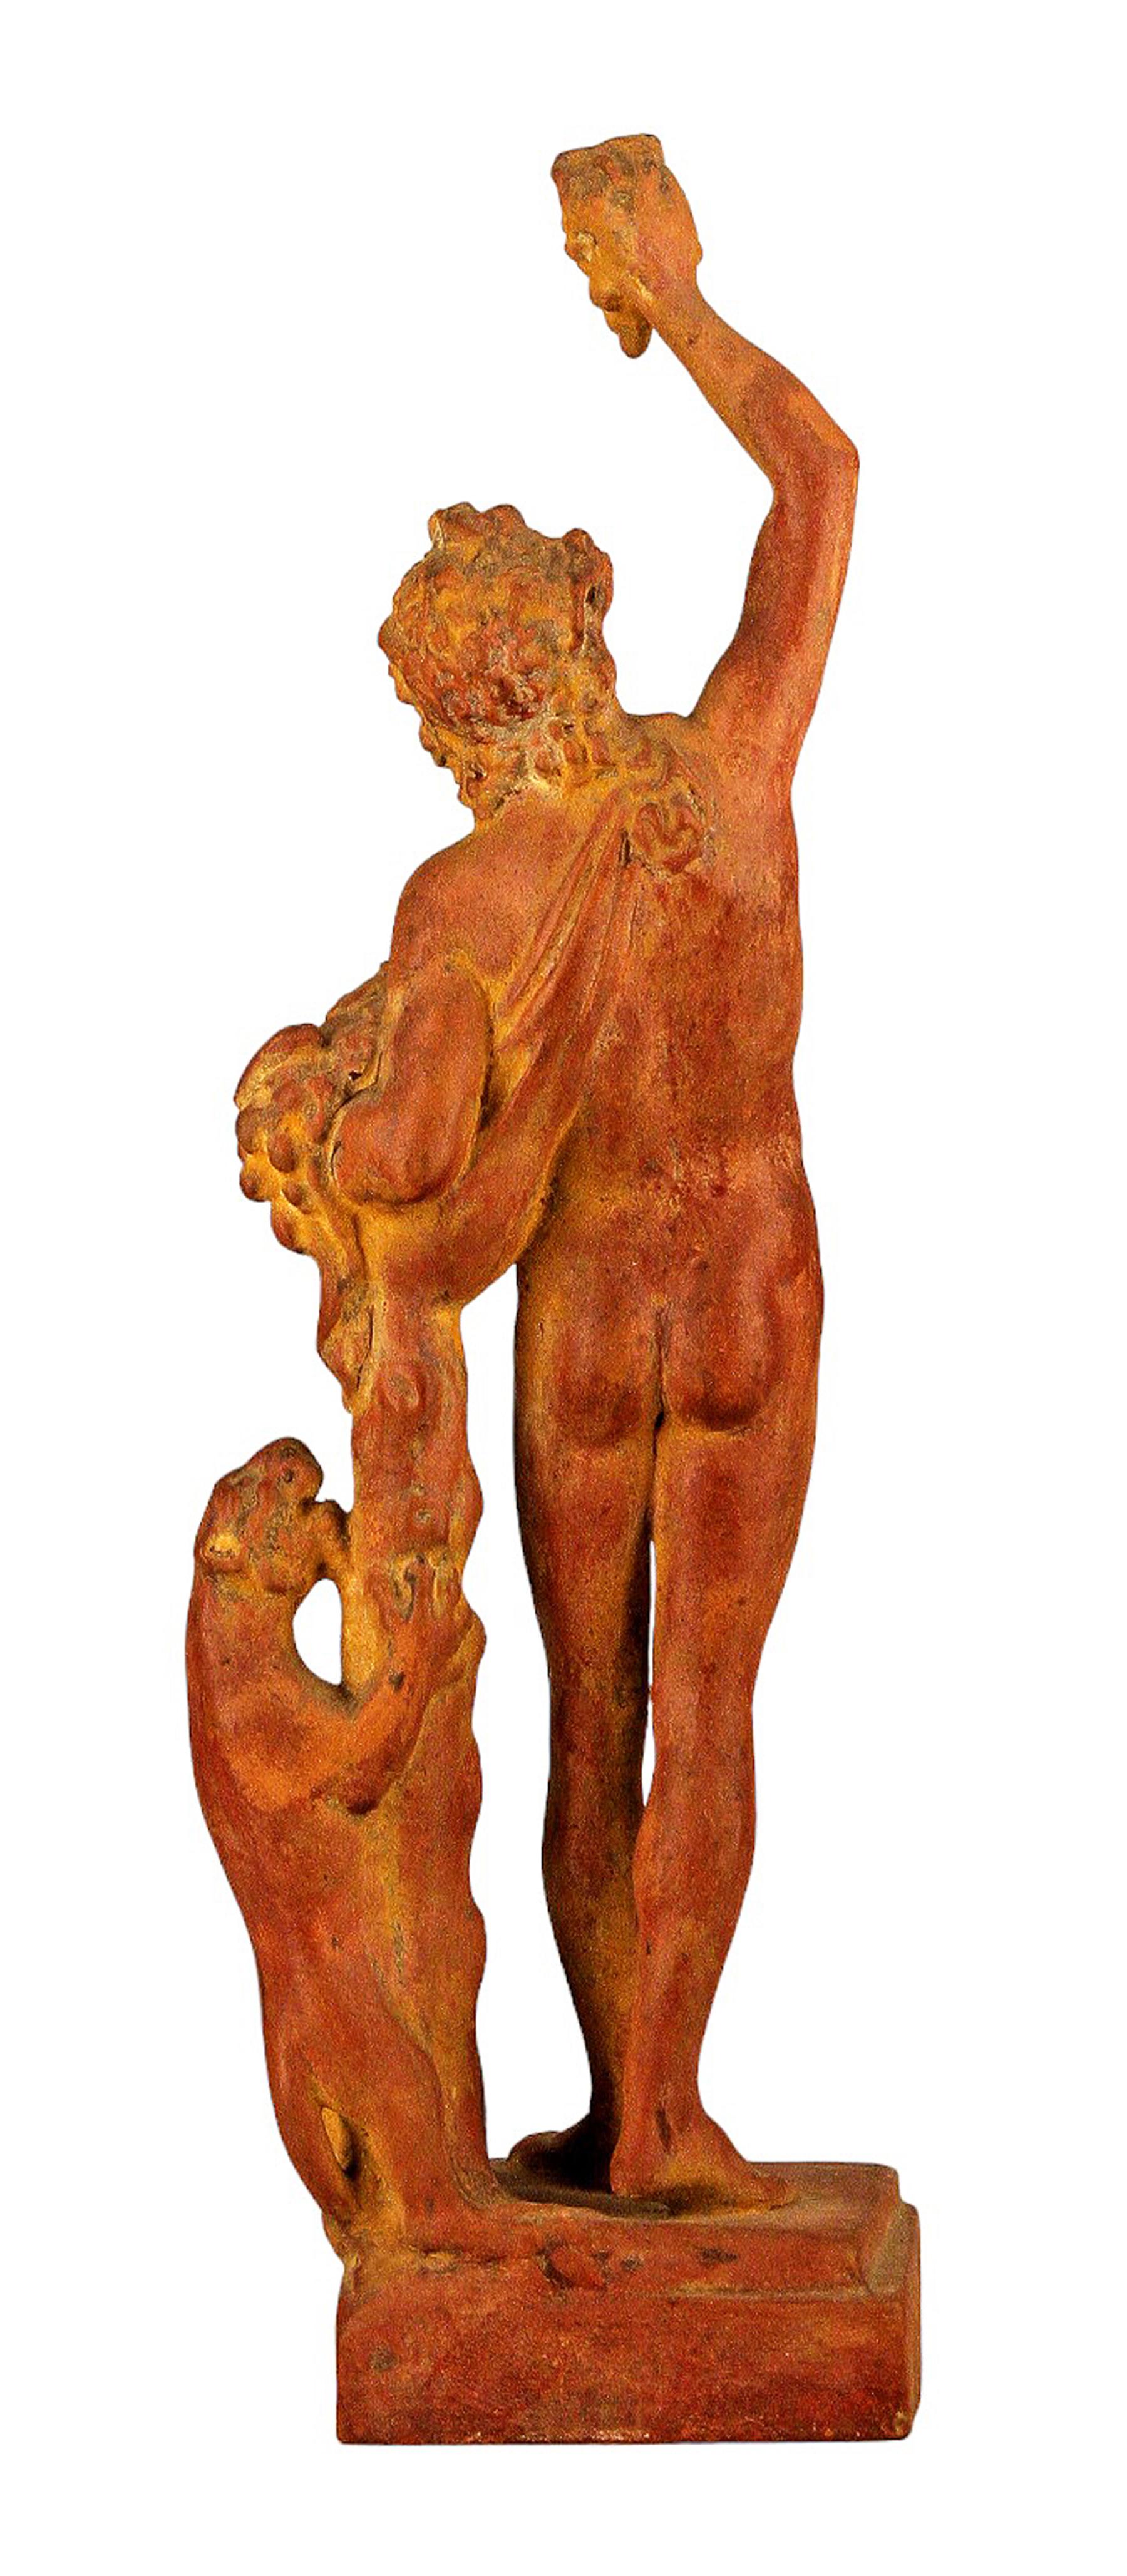 Carved Early 20th Century Italian Terracota Sculpture of Bacchus by Dini e Cellai Signa For Sale